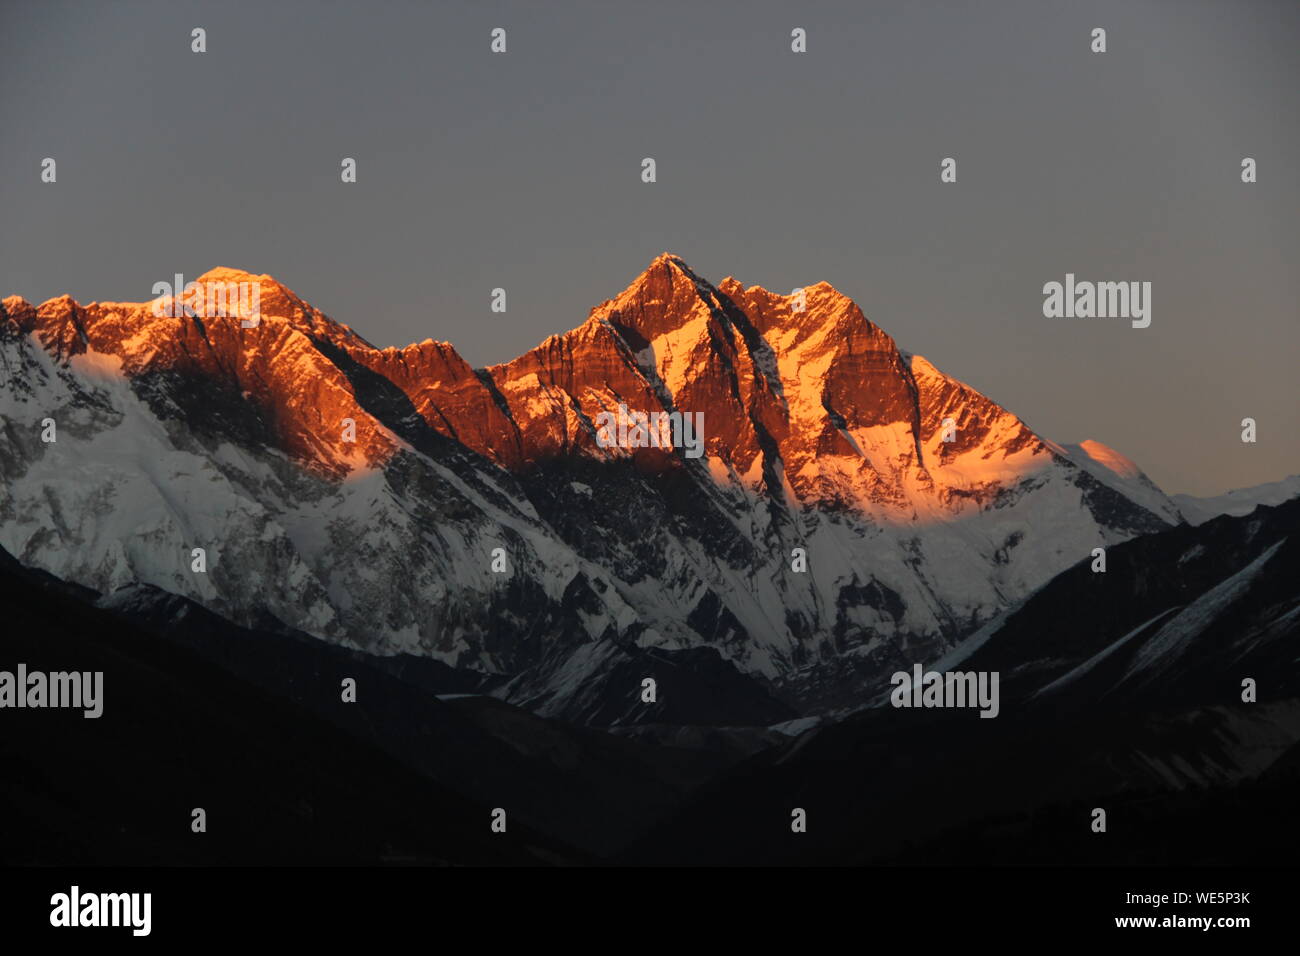 Sunset in the Himalayas - Alpenglow Stock Photo